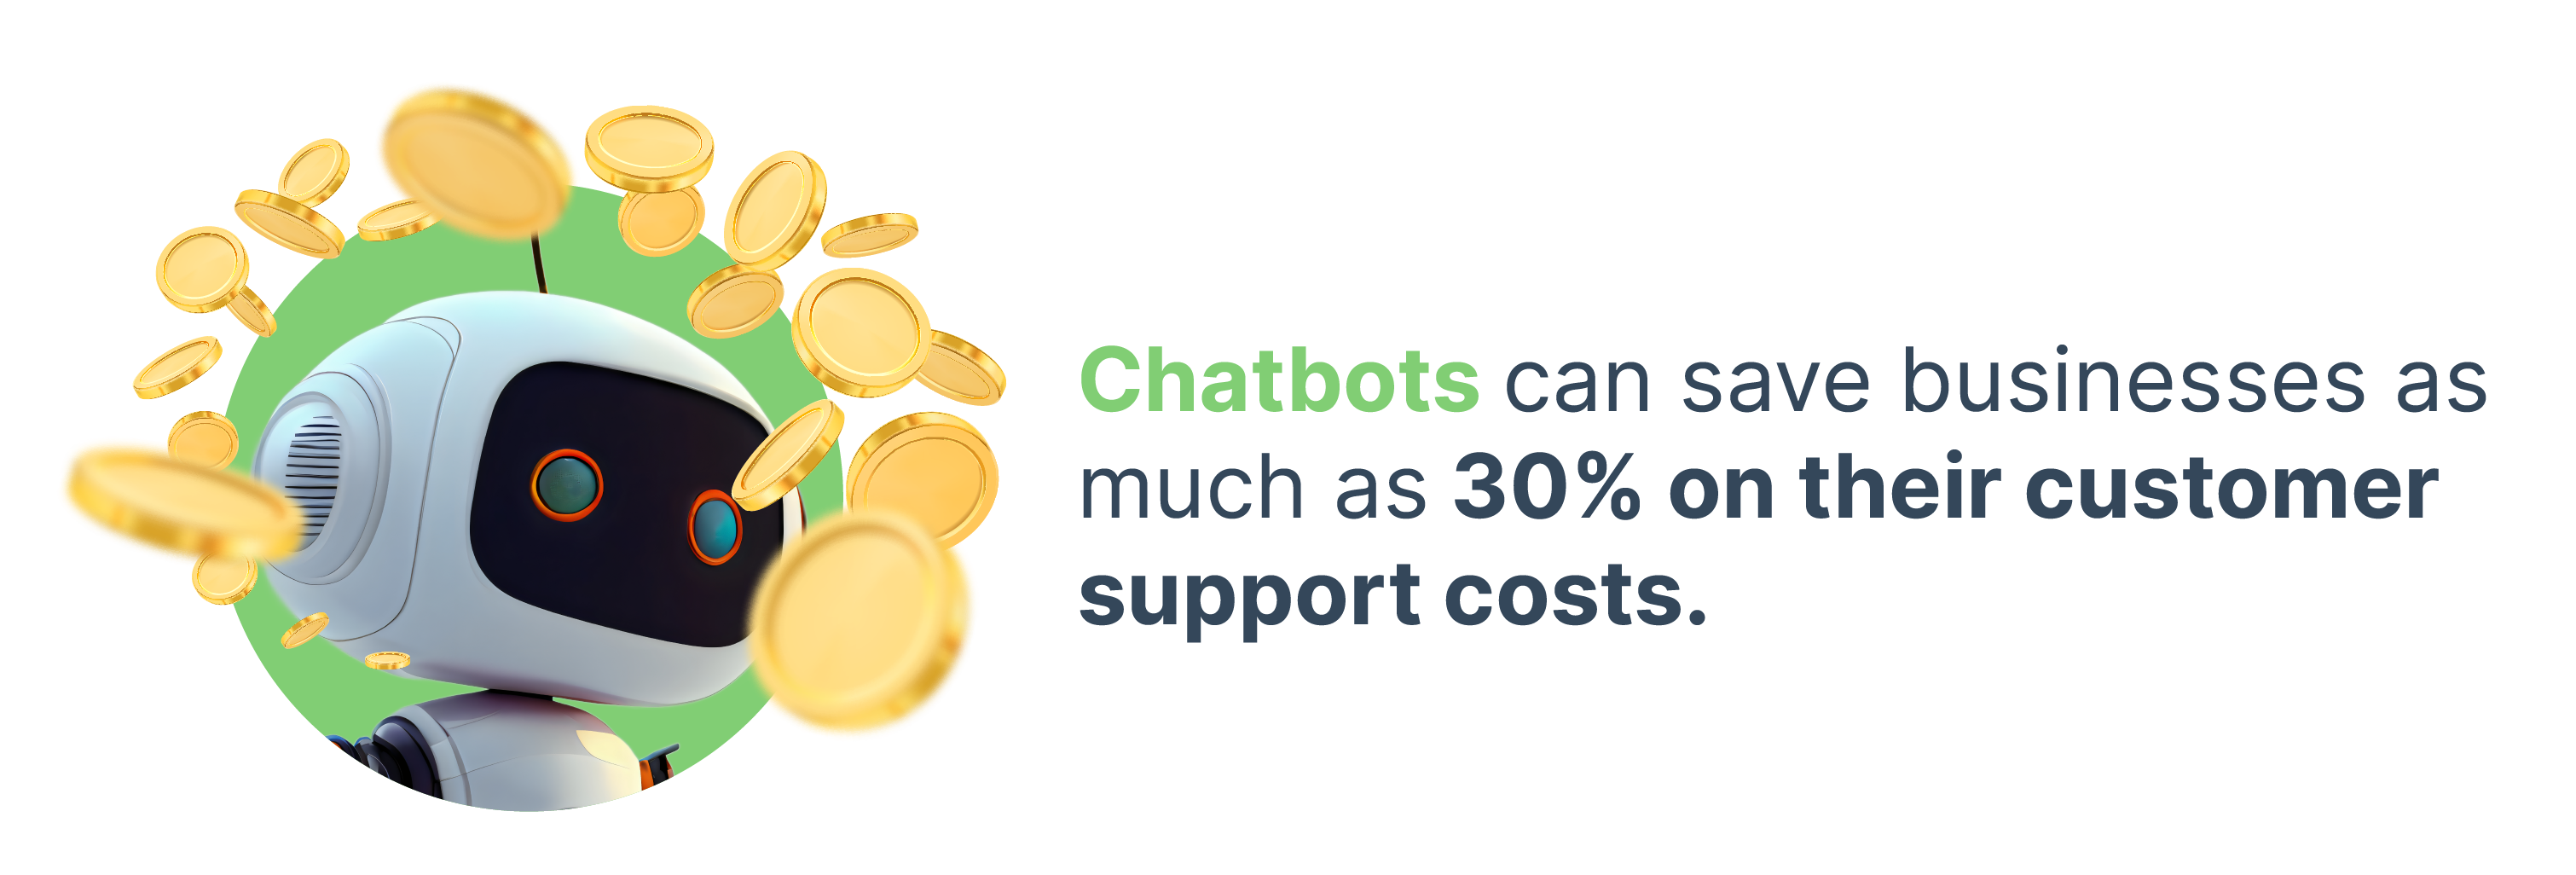 Chatbots can save businesses as much as 30% on their customer support costs.